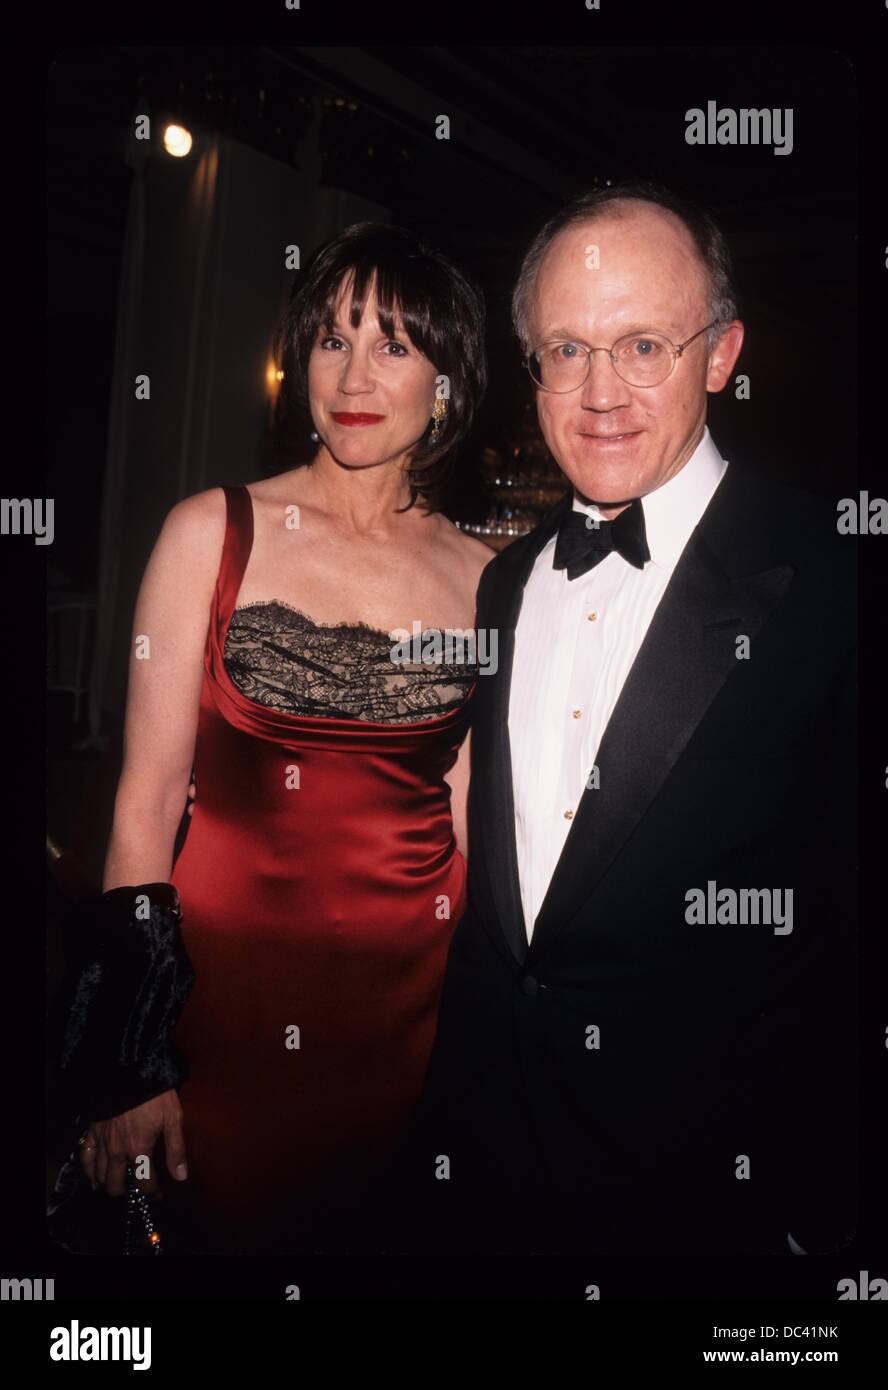 WOODY JOHNSON with wife Sale Johnson.The Red Ball - The Valentine of the Millennium at Plaza Hotel 2000.k17979ar.(Credit Image: © Andrea Renault/Globe Photos/ZUMAPRESS.com) Stock Photo